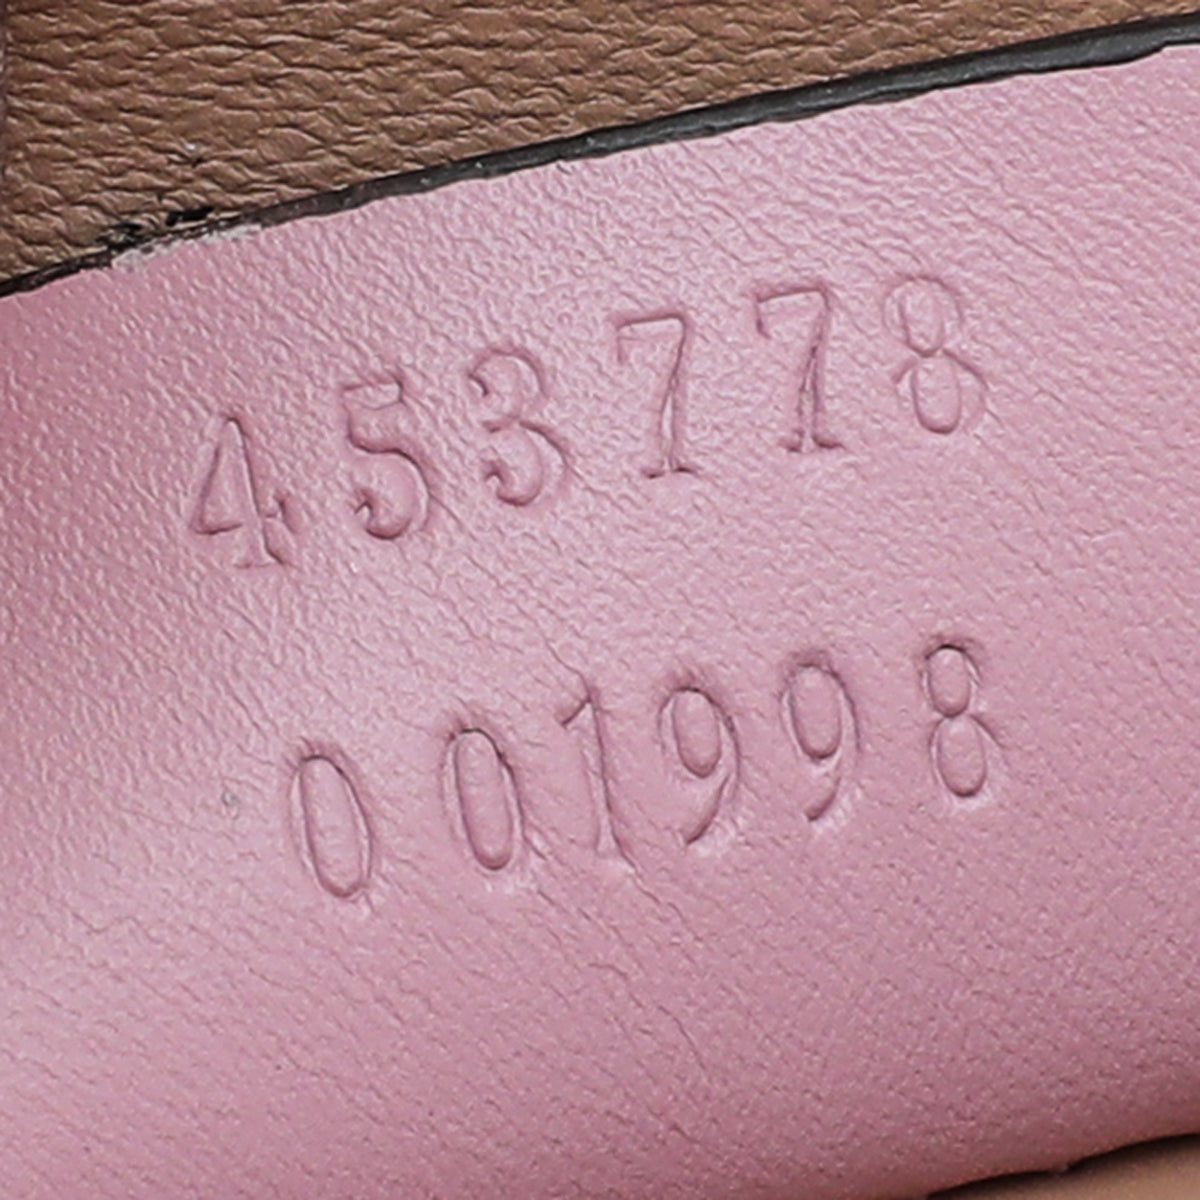 Gucci Pink Pearl Studded Queen Margaret Broadway Bag